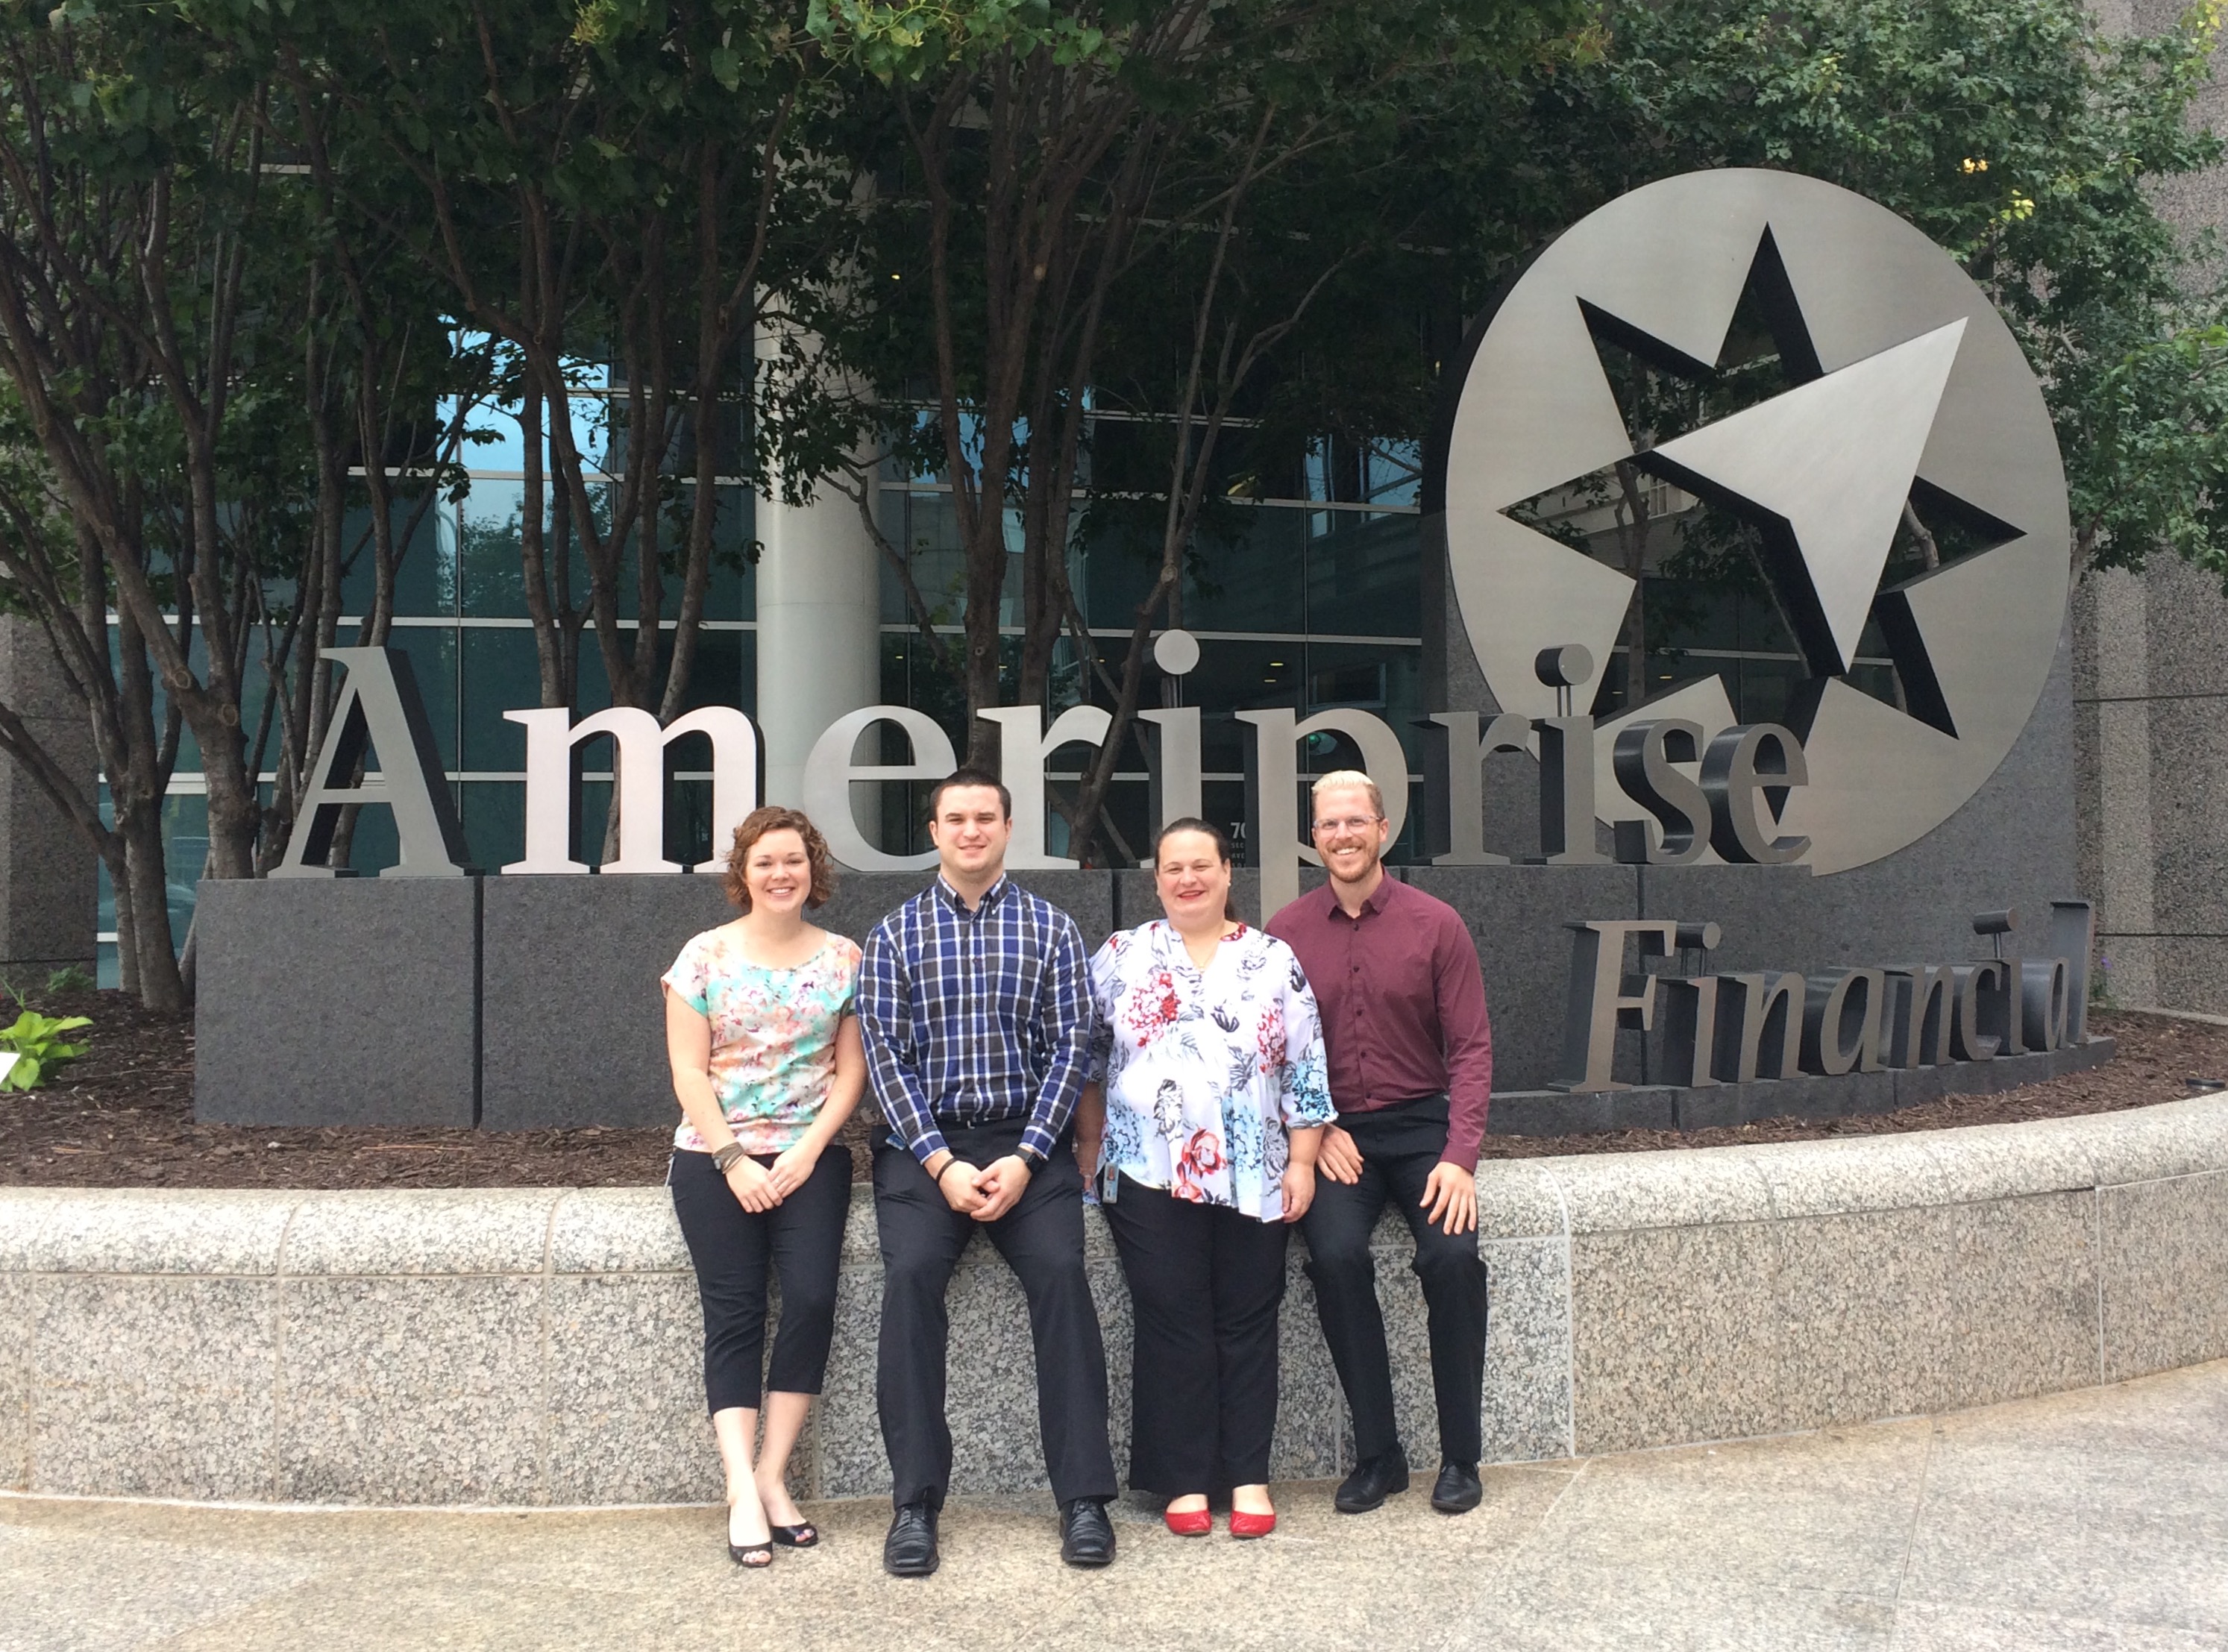 Gusties on the Talent Acquisition team at Ameriprise Financial